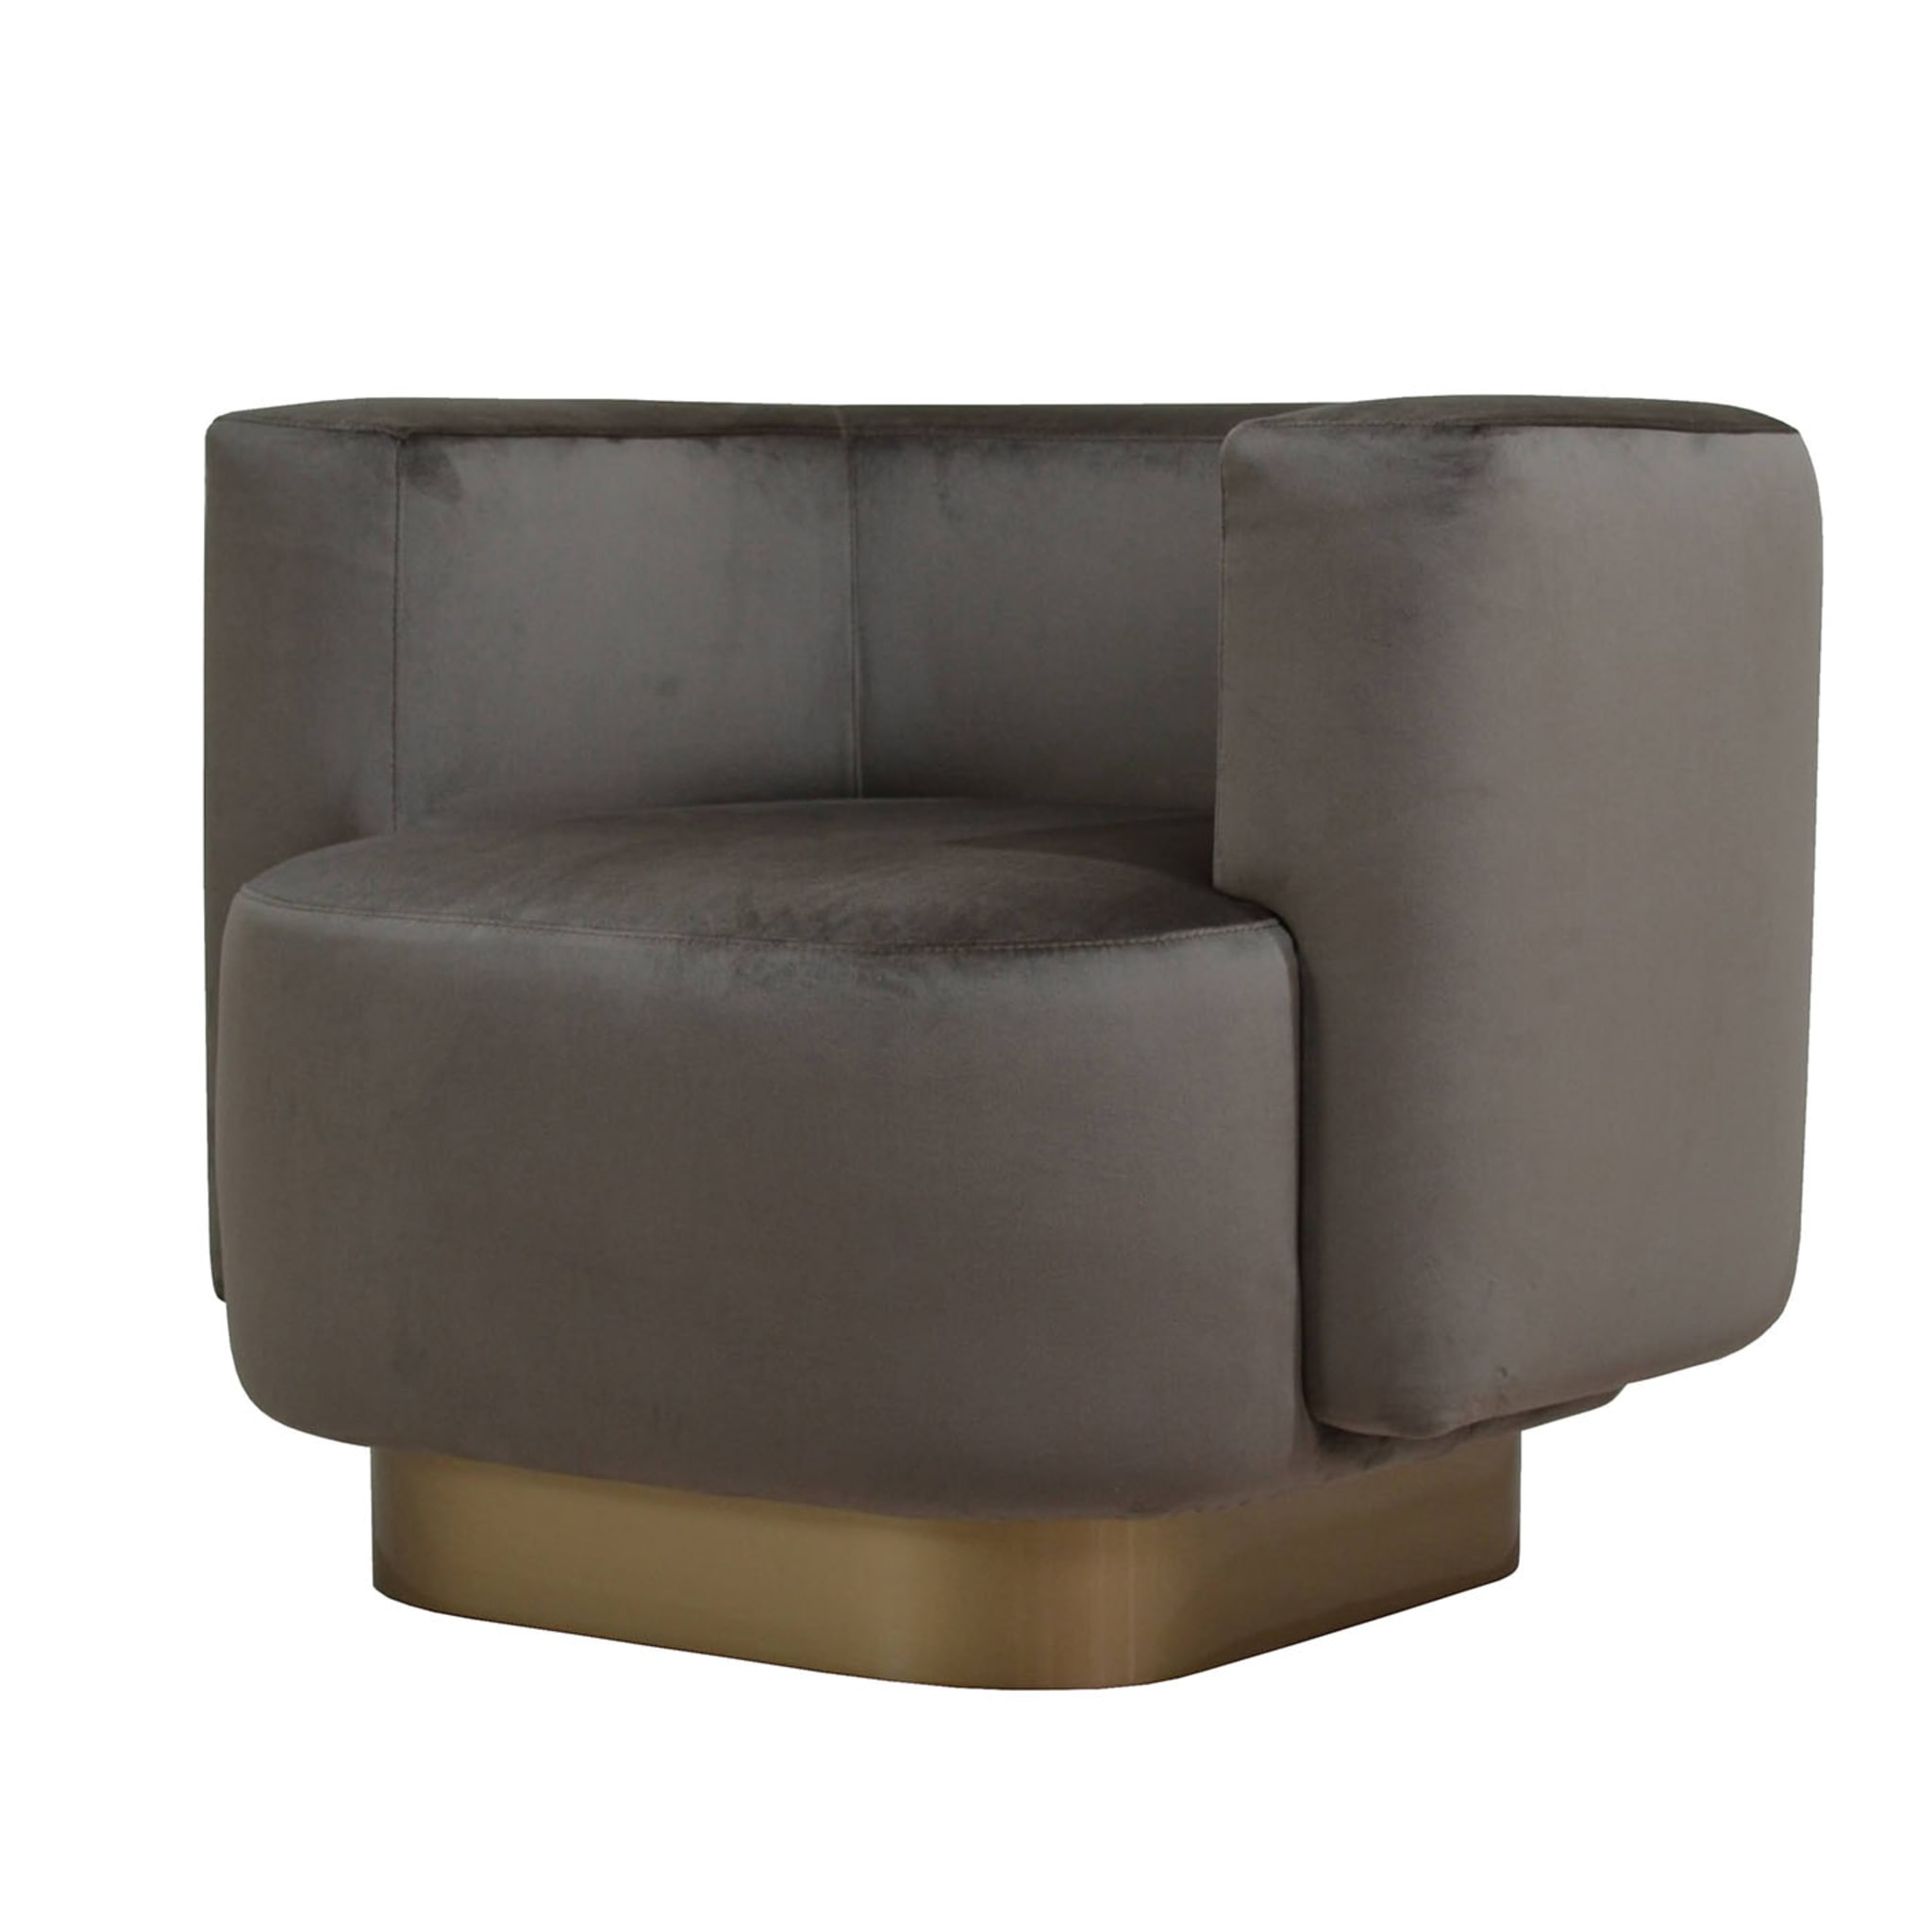 Italian Contemporary Lounge Upholstered Armchair in Mocha Brown - Alternative view 1